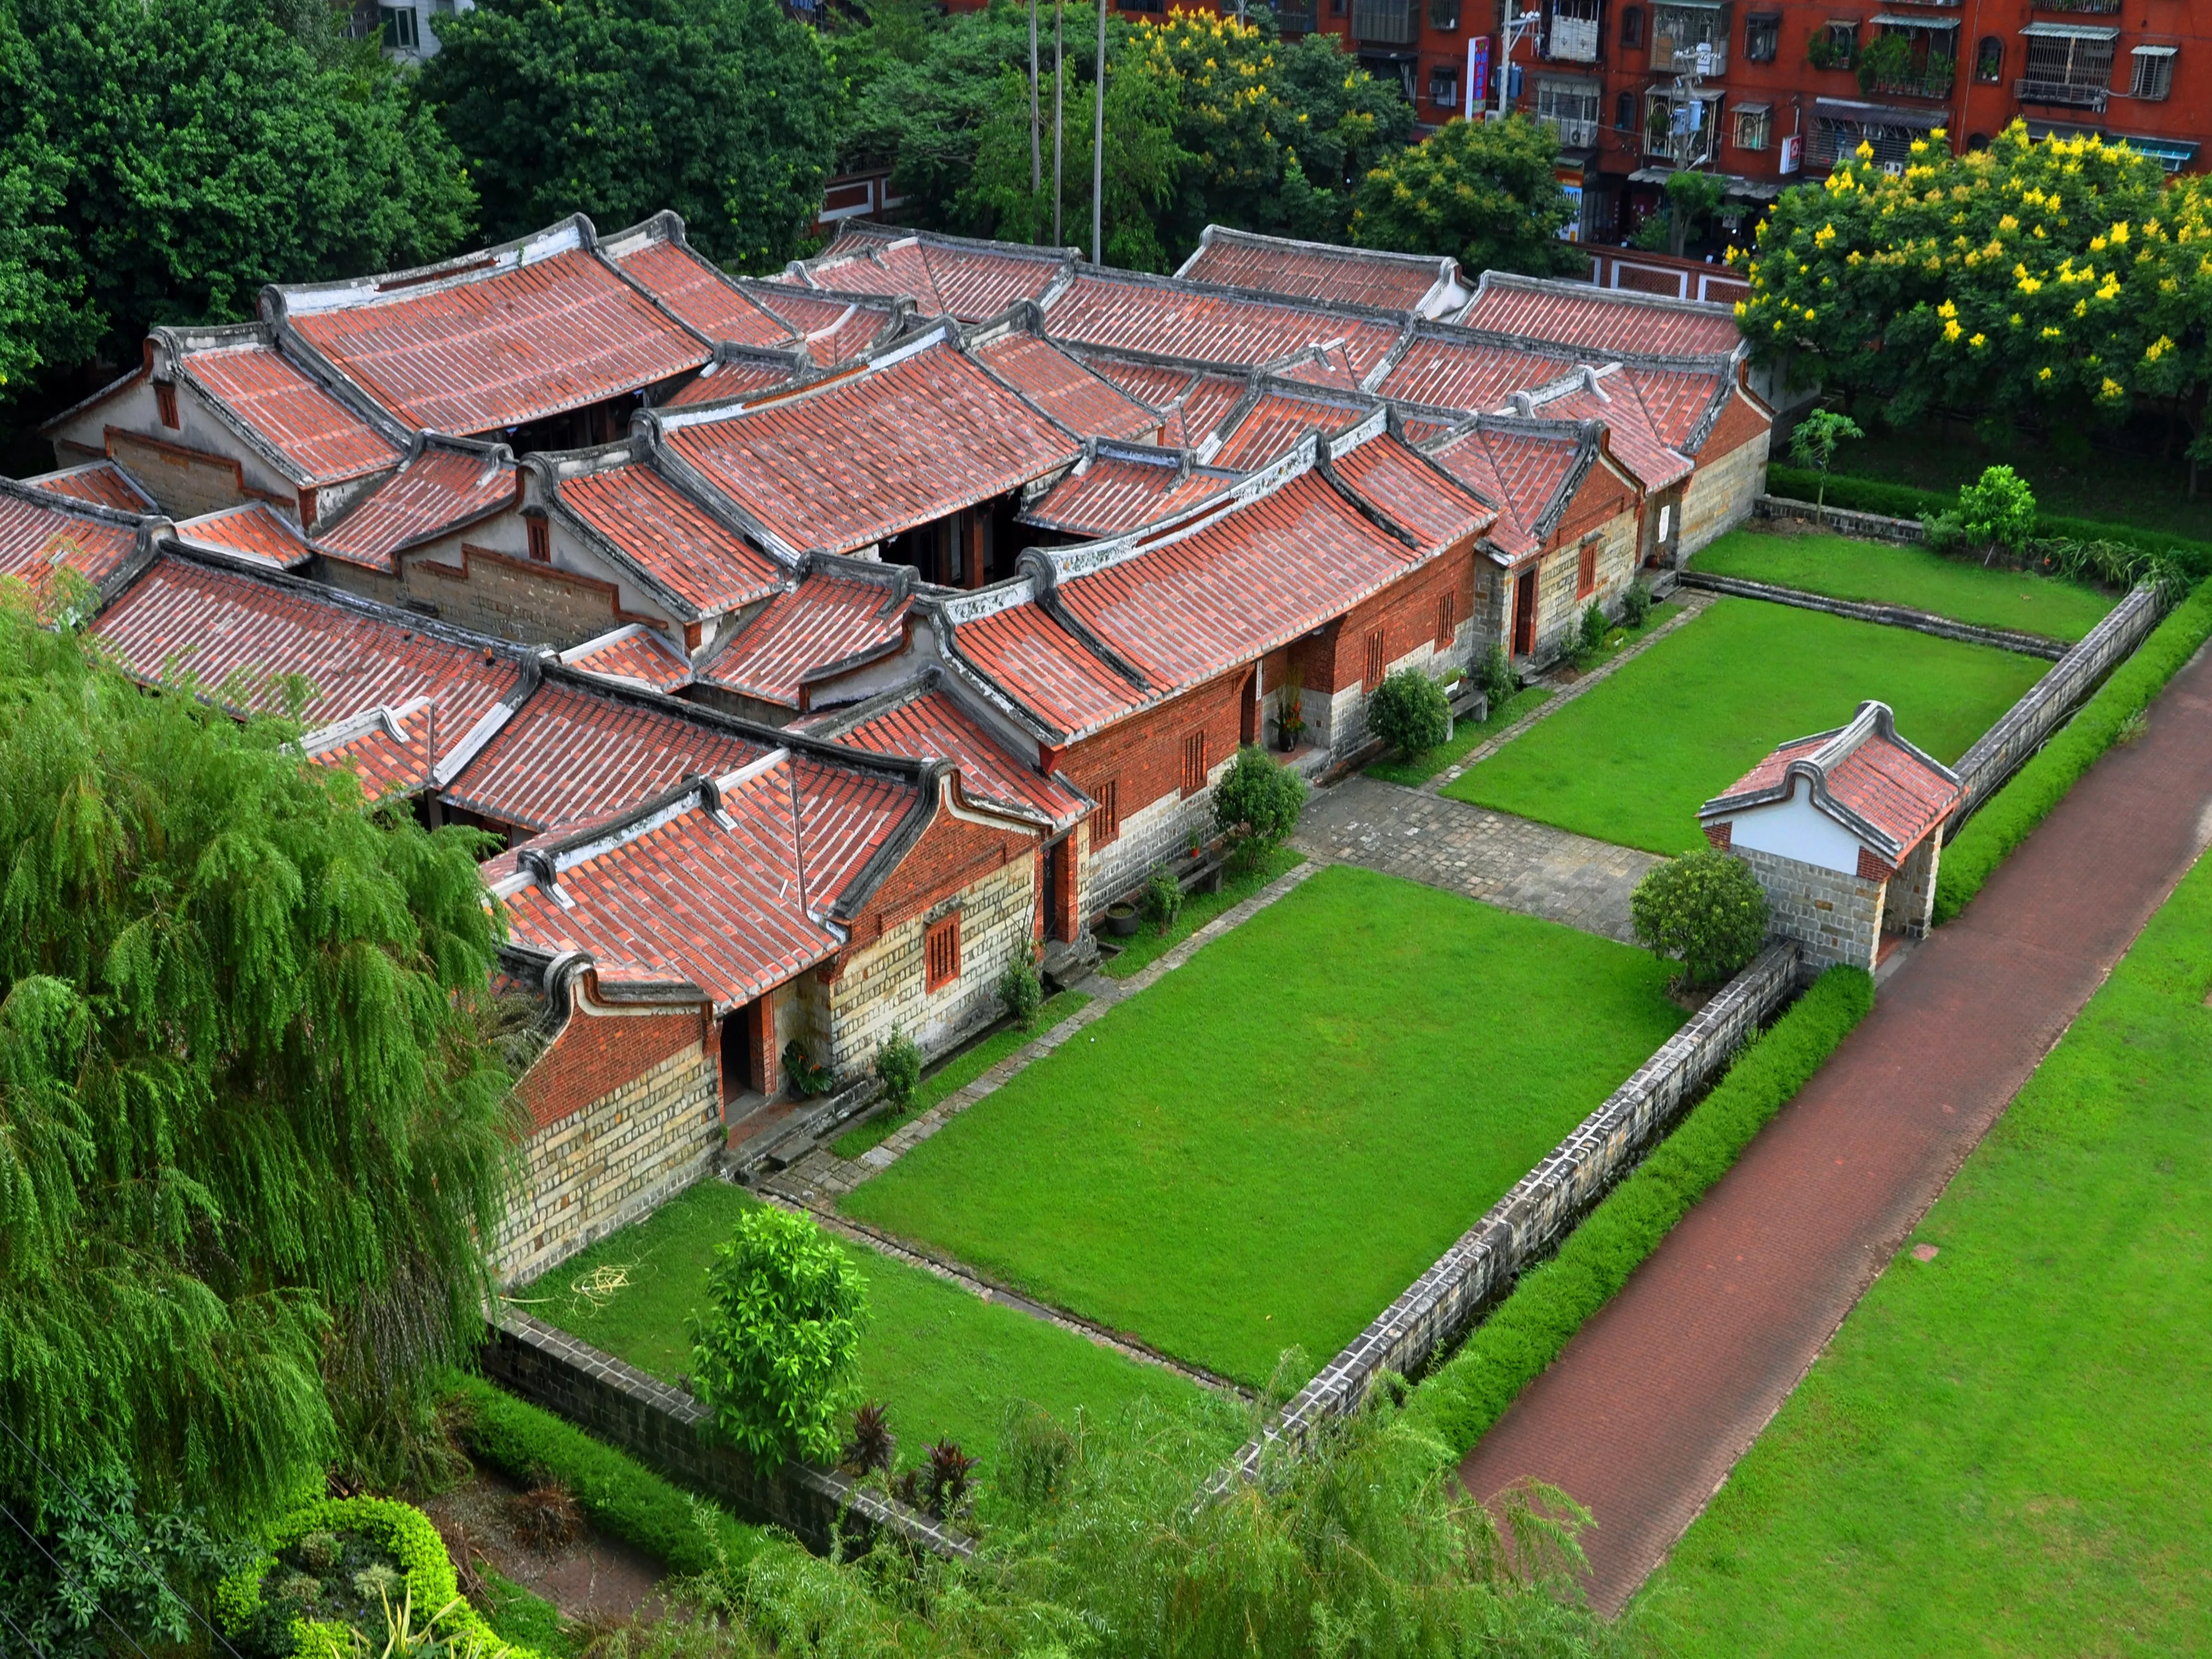 The Luzhou Lee Family Historic Estate in Taiwan, East Asia | Architecture - Rated 3.5